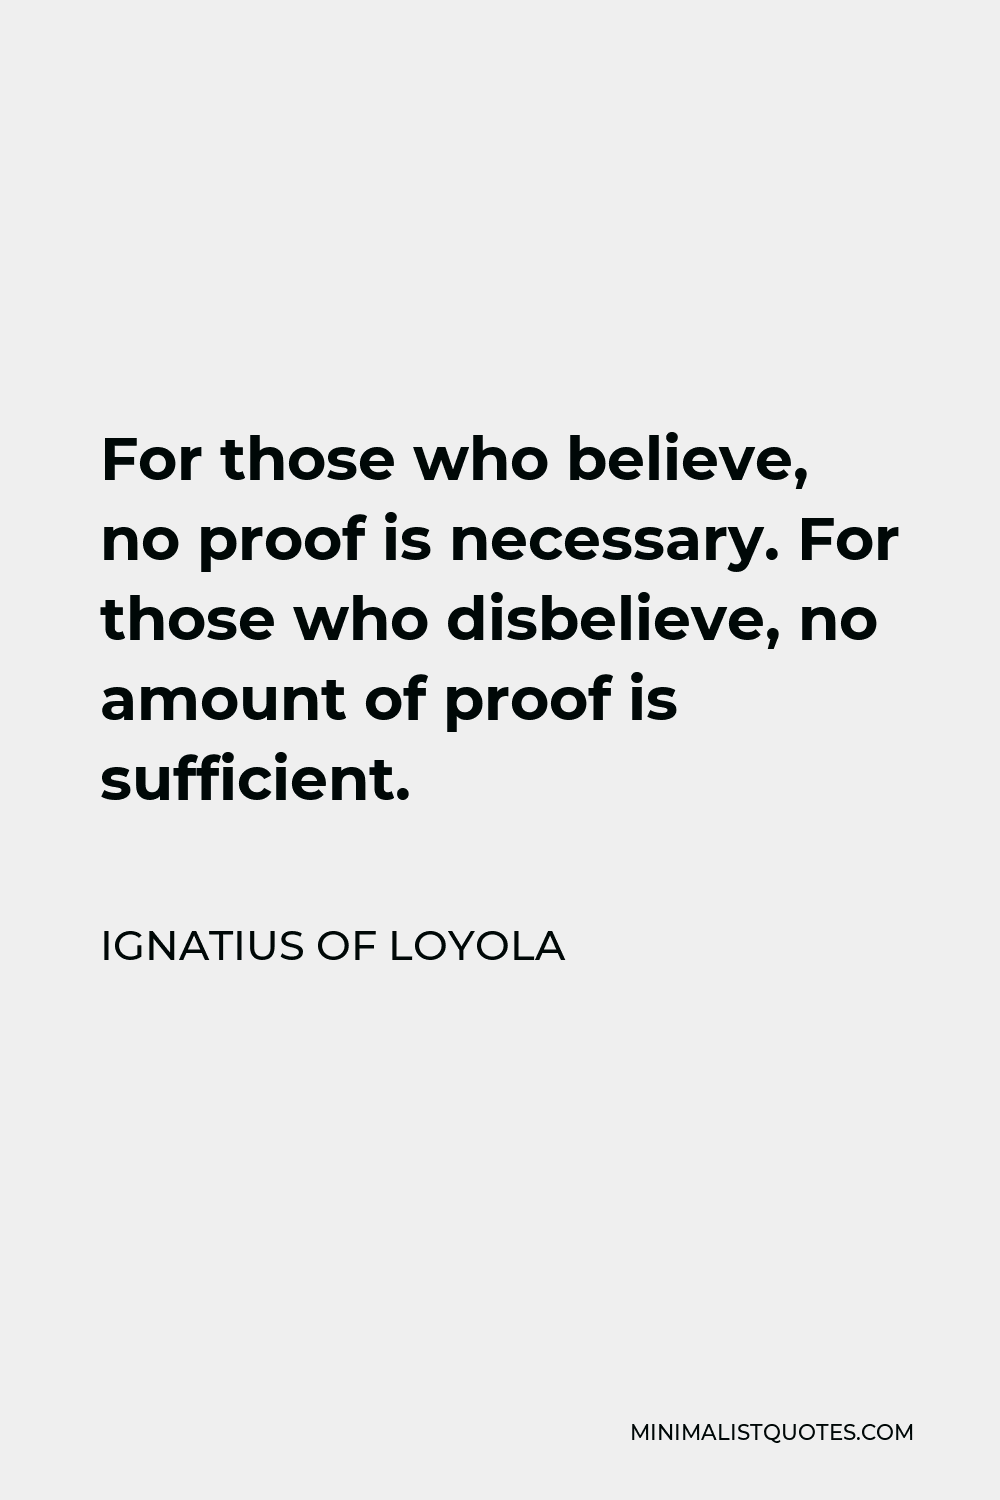 Ignatius of Loyola Quote - For those who believe, no proof is necessary. For those who disbelieve, no amount of proof is sufficient.